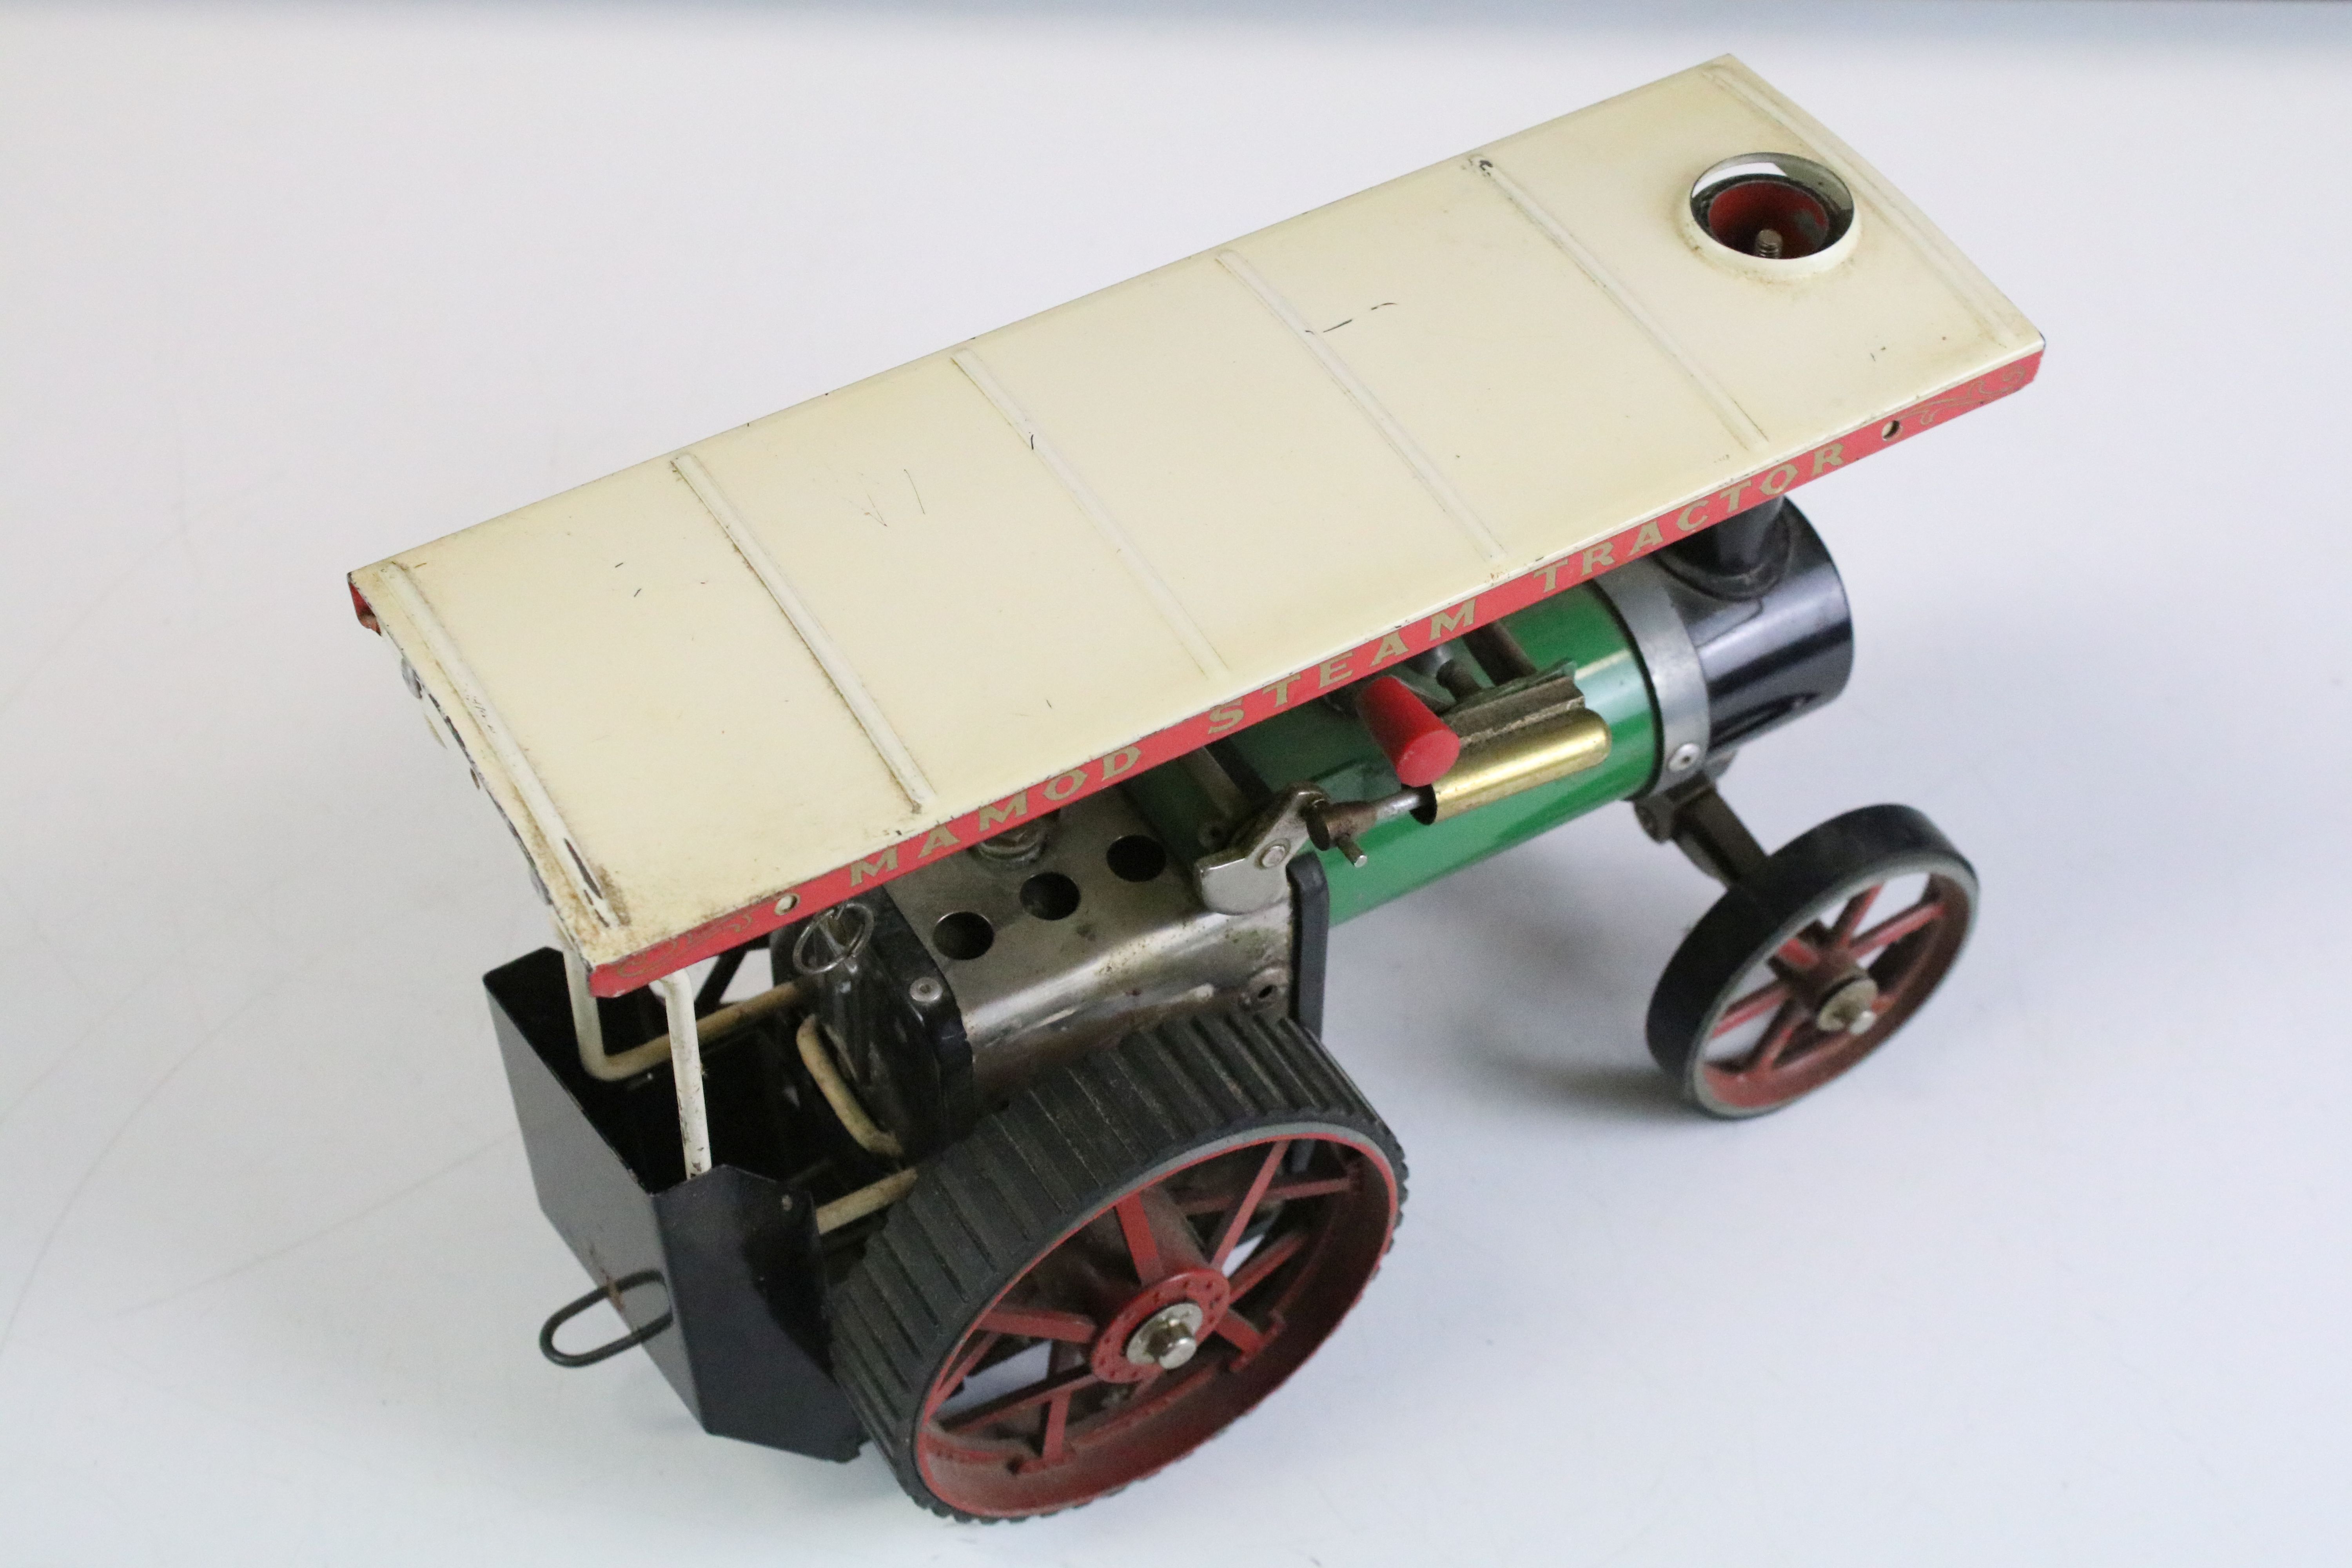 Mamod TE1A Steam Traction Engine plus an unmarked stationary steam engine and accessories - Image 6 of 6